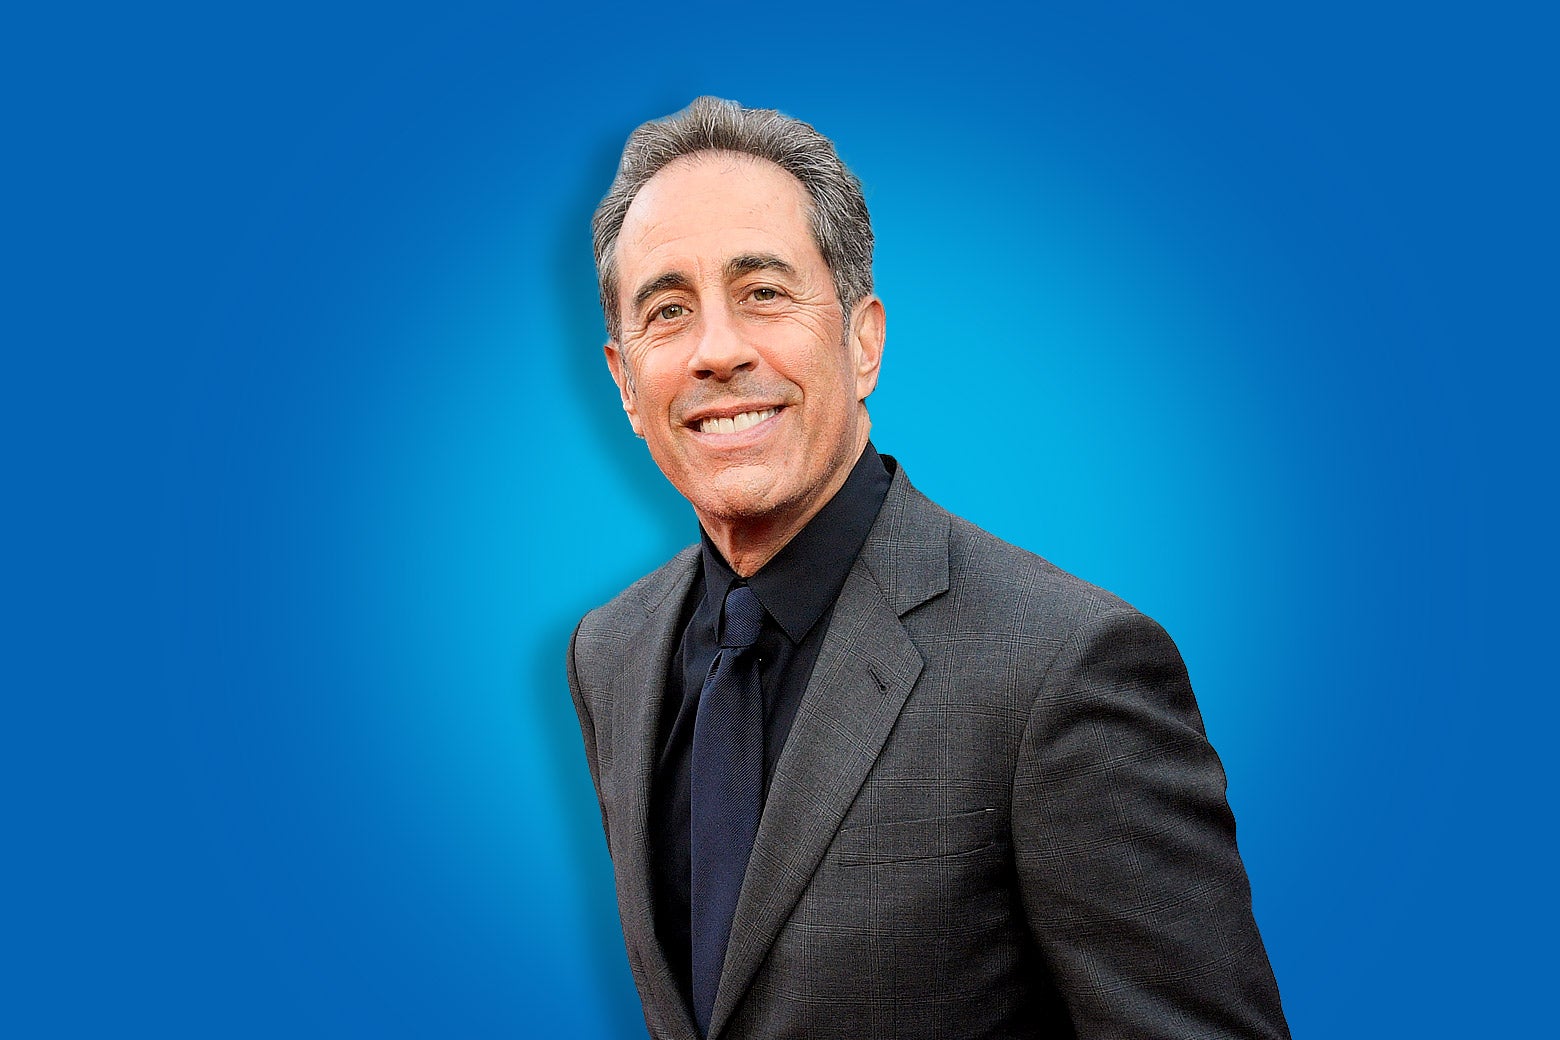 What Is the Deal With Jerry Seinfeld? Dan Kois